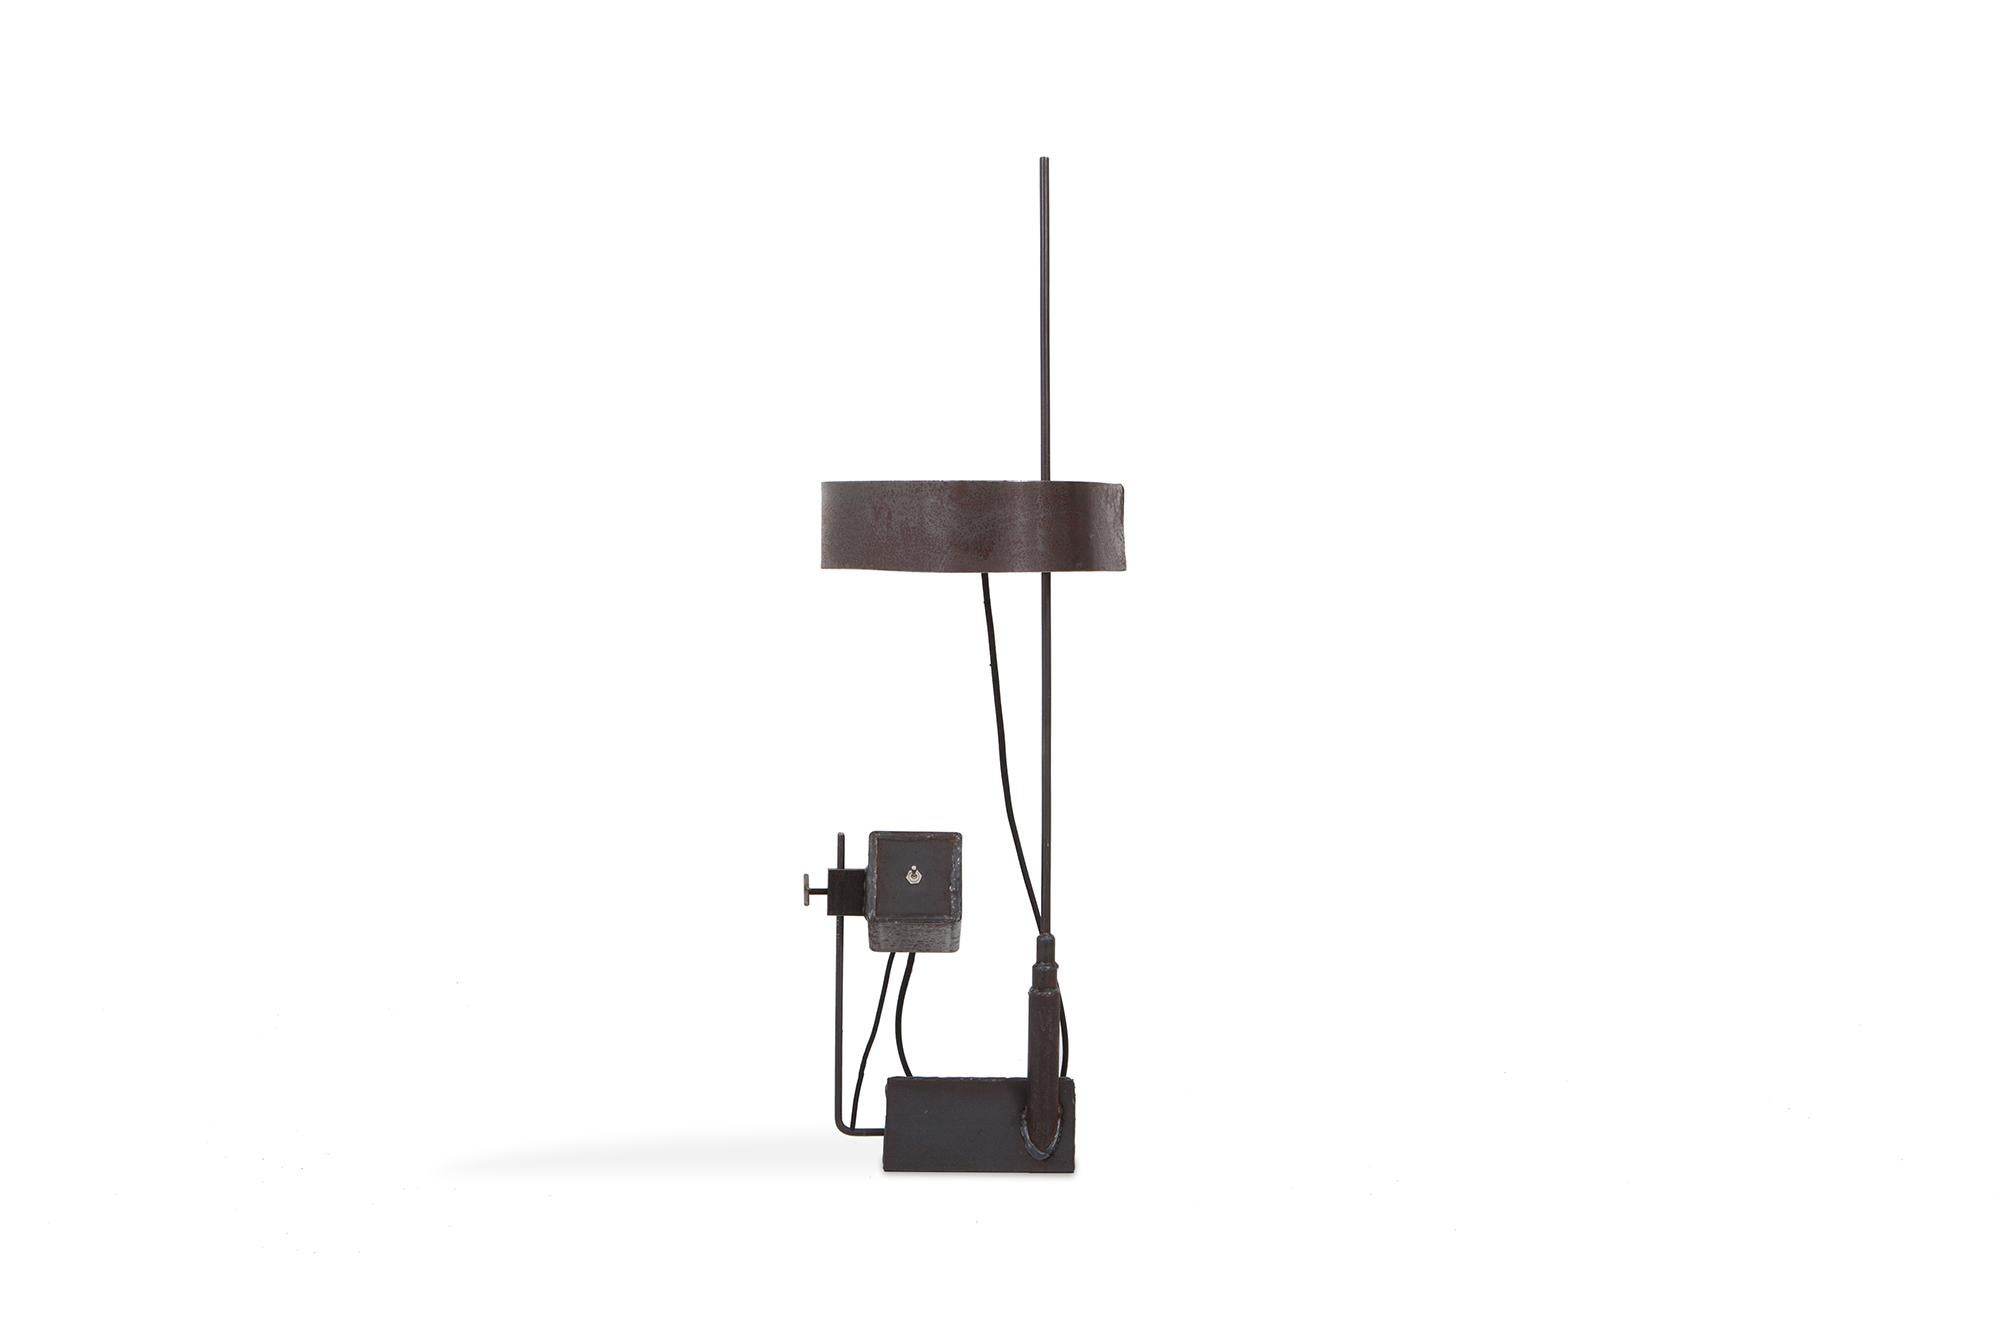 Brutalist table/floor lamp by Atelier Serruys, made in Belgium, 2018. 

This one-of-a-kind piece is adjustable and part of the Critique oblique collection - Number C0 04, which are all handcrafted. Playful Aesthetics that created a wonderful